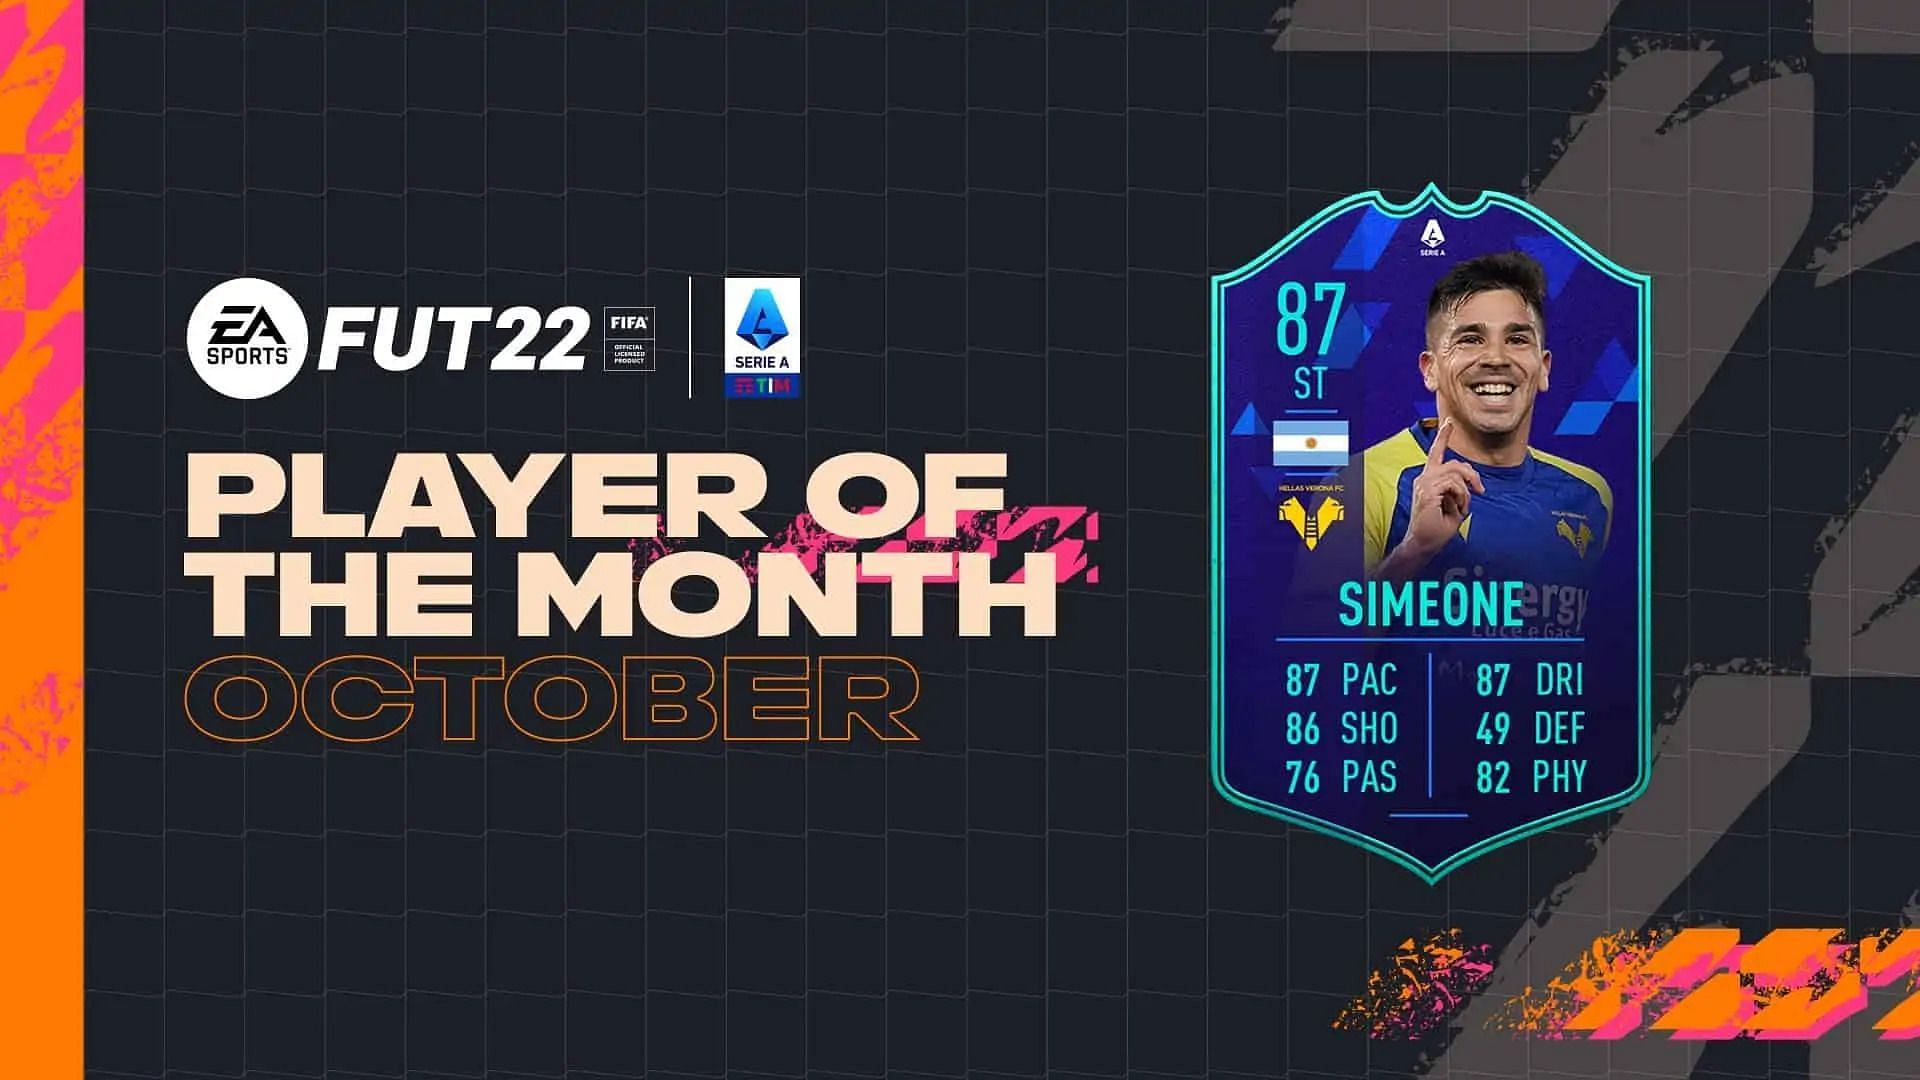 Giovanni Simeone is the Serie A potm for October (Image via EA Sports)